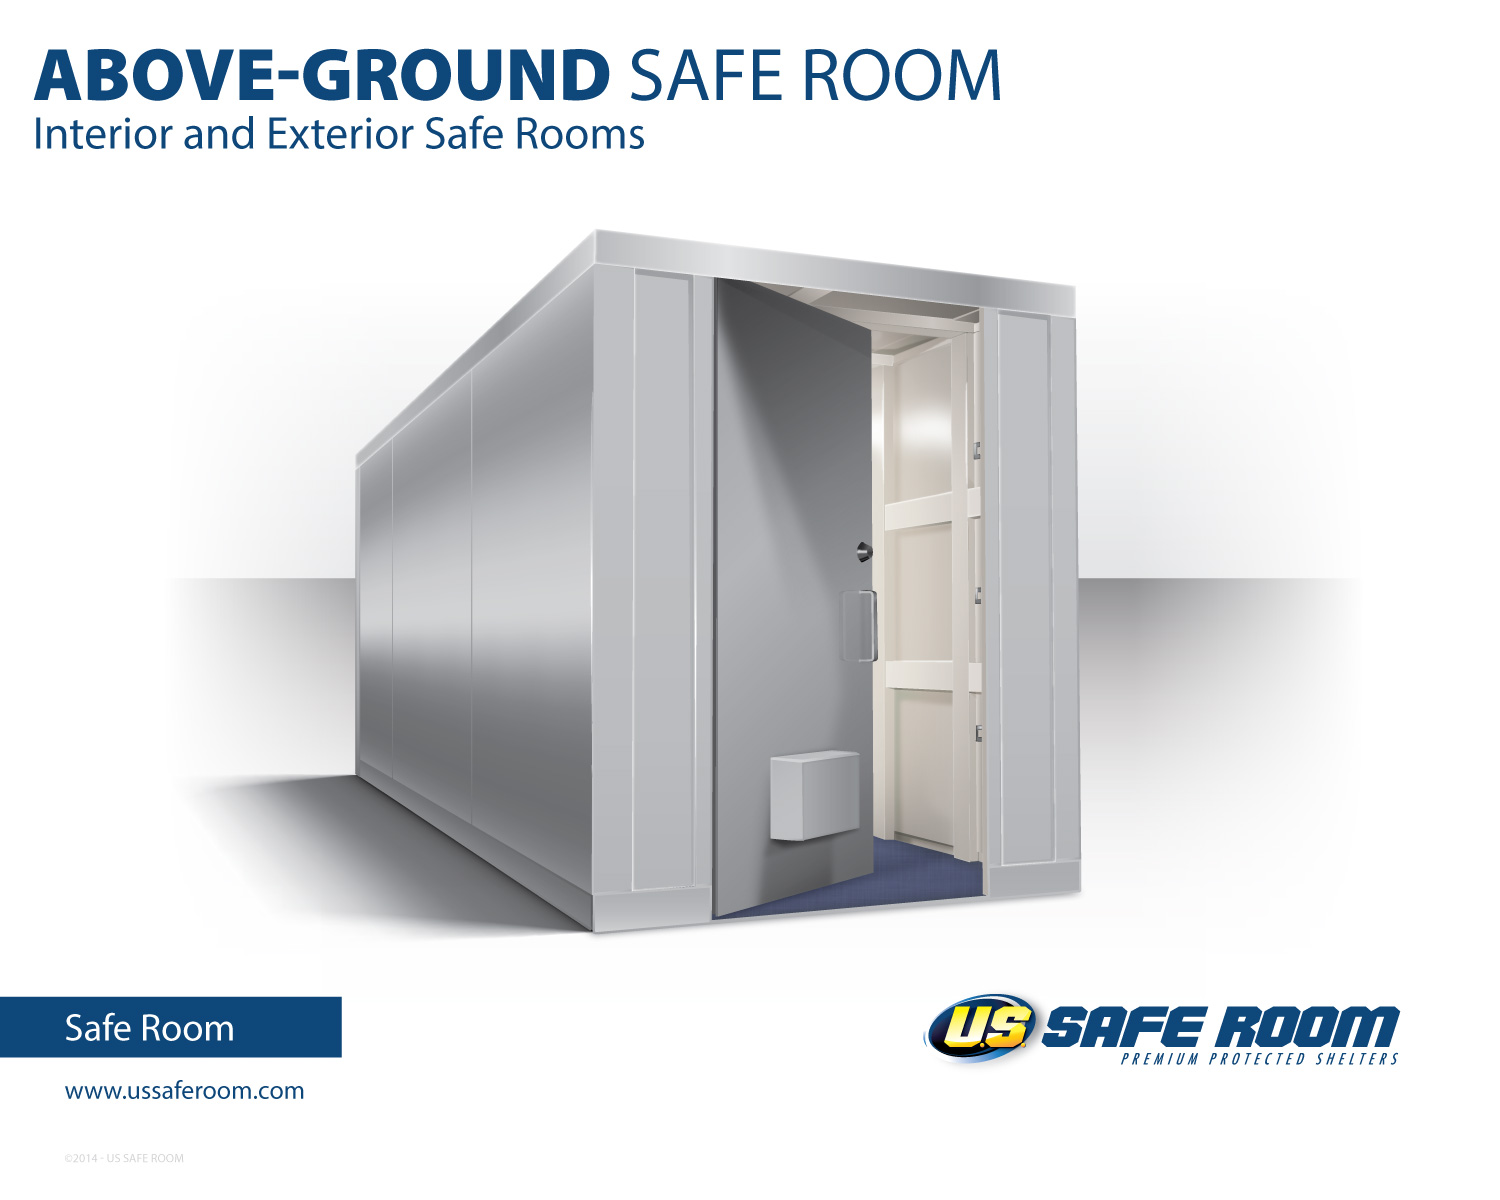 above-ground safe rooms